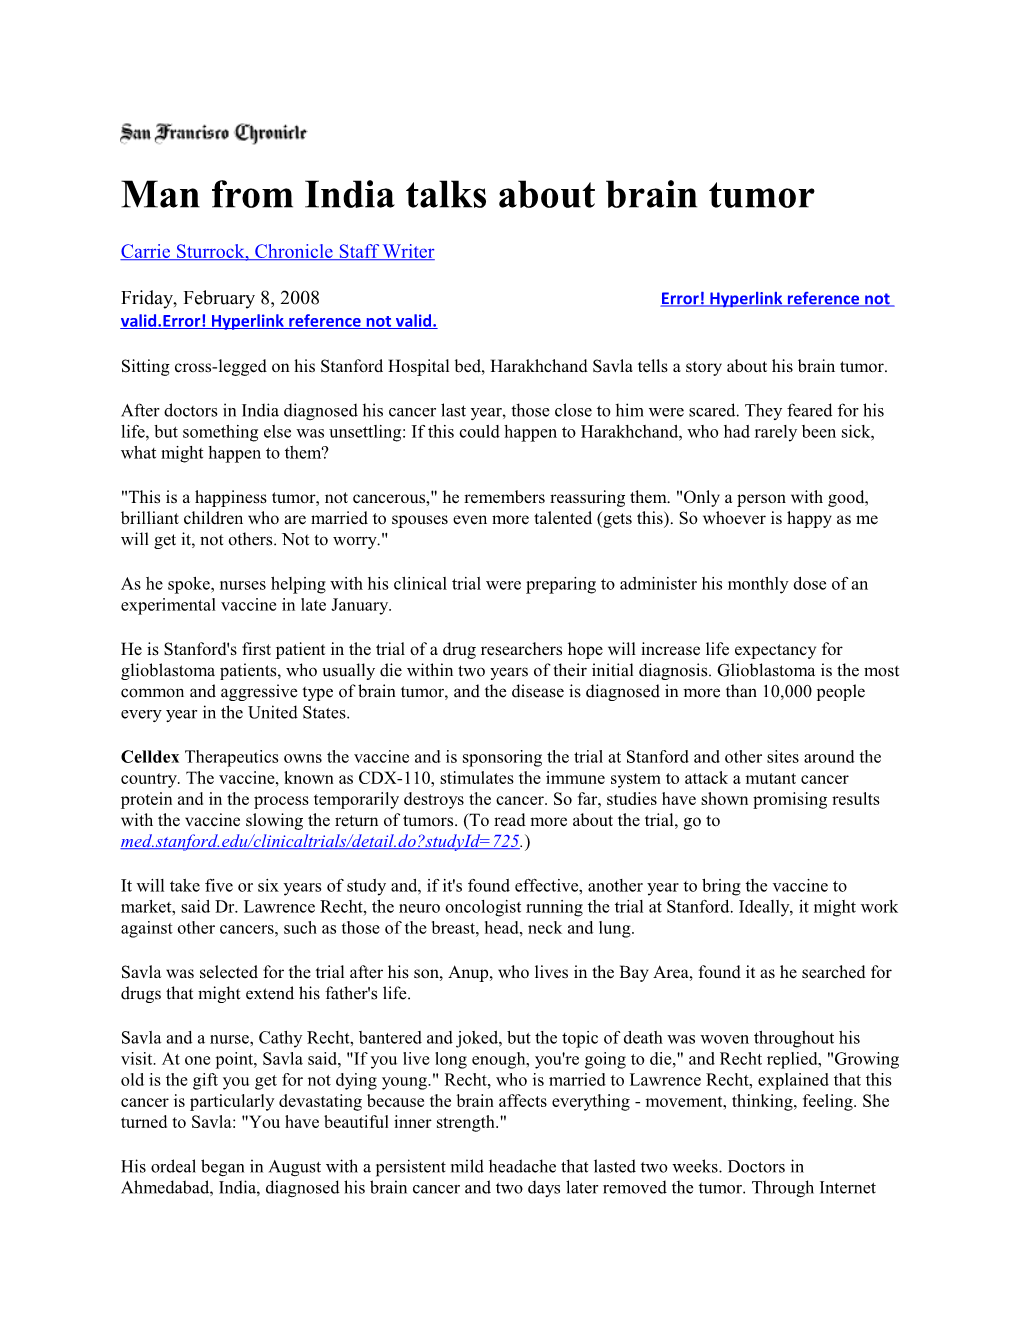 Man from India Talks About Brain Tumor